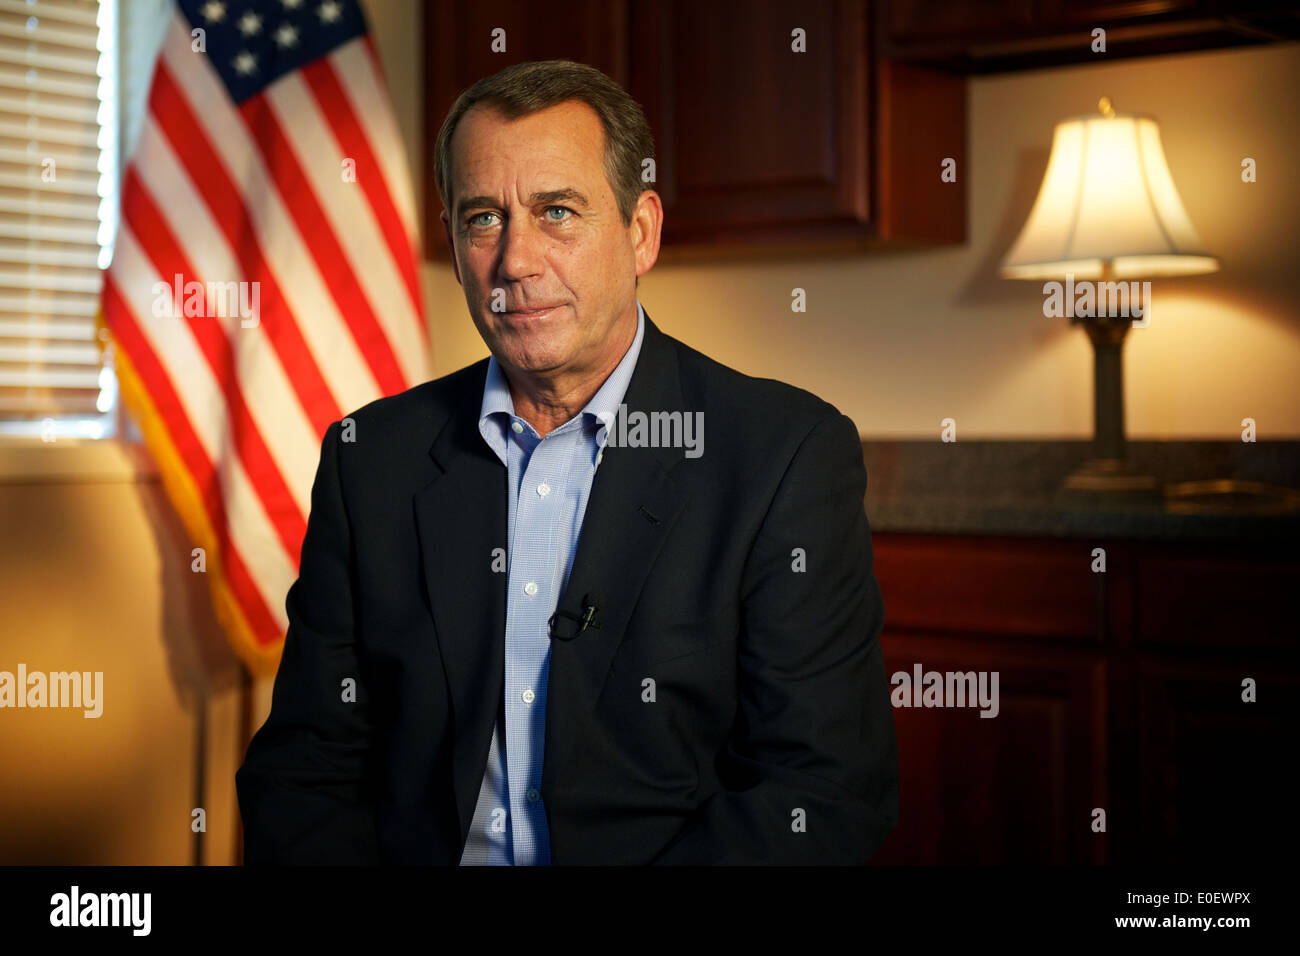 US House Minority Leader Rep. John Boehner delivers the weekly Republican Radio Address October 27, 2010 in Washington, DC. Stock Photo